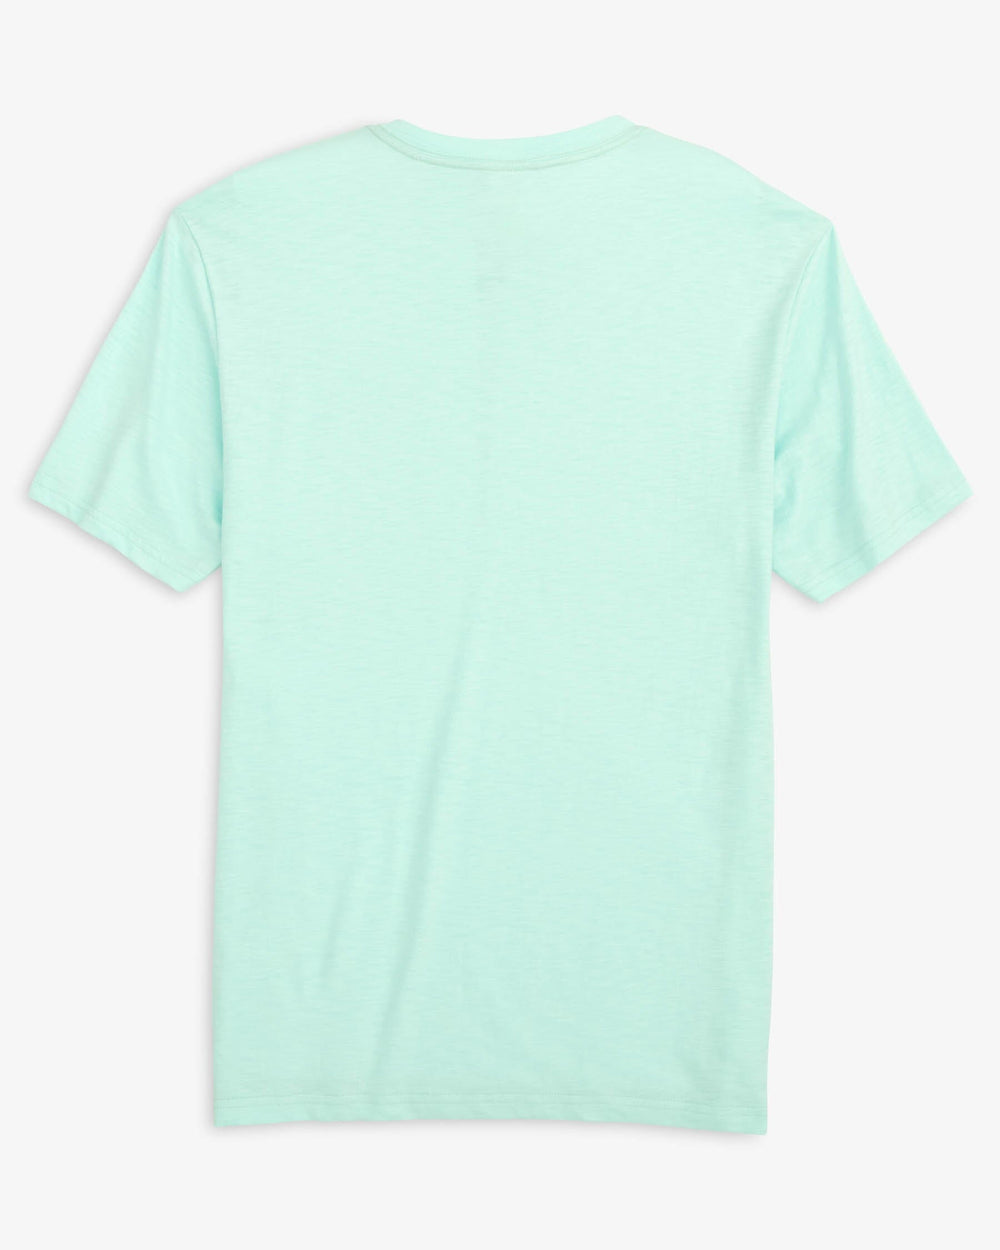 The back view of the Southern Tide Sun Farer Short Sleeve T-Shirt by Southern Tide - Baltic Teal